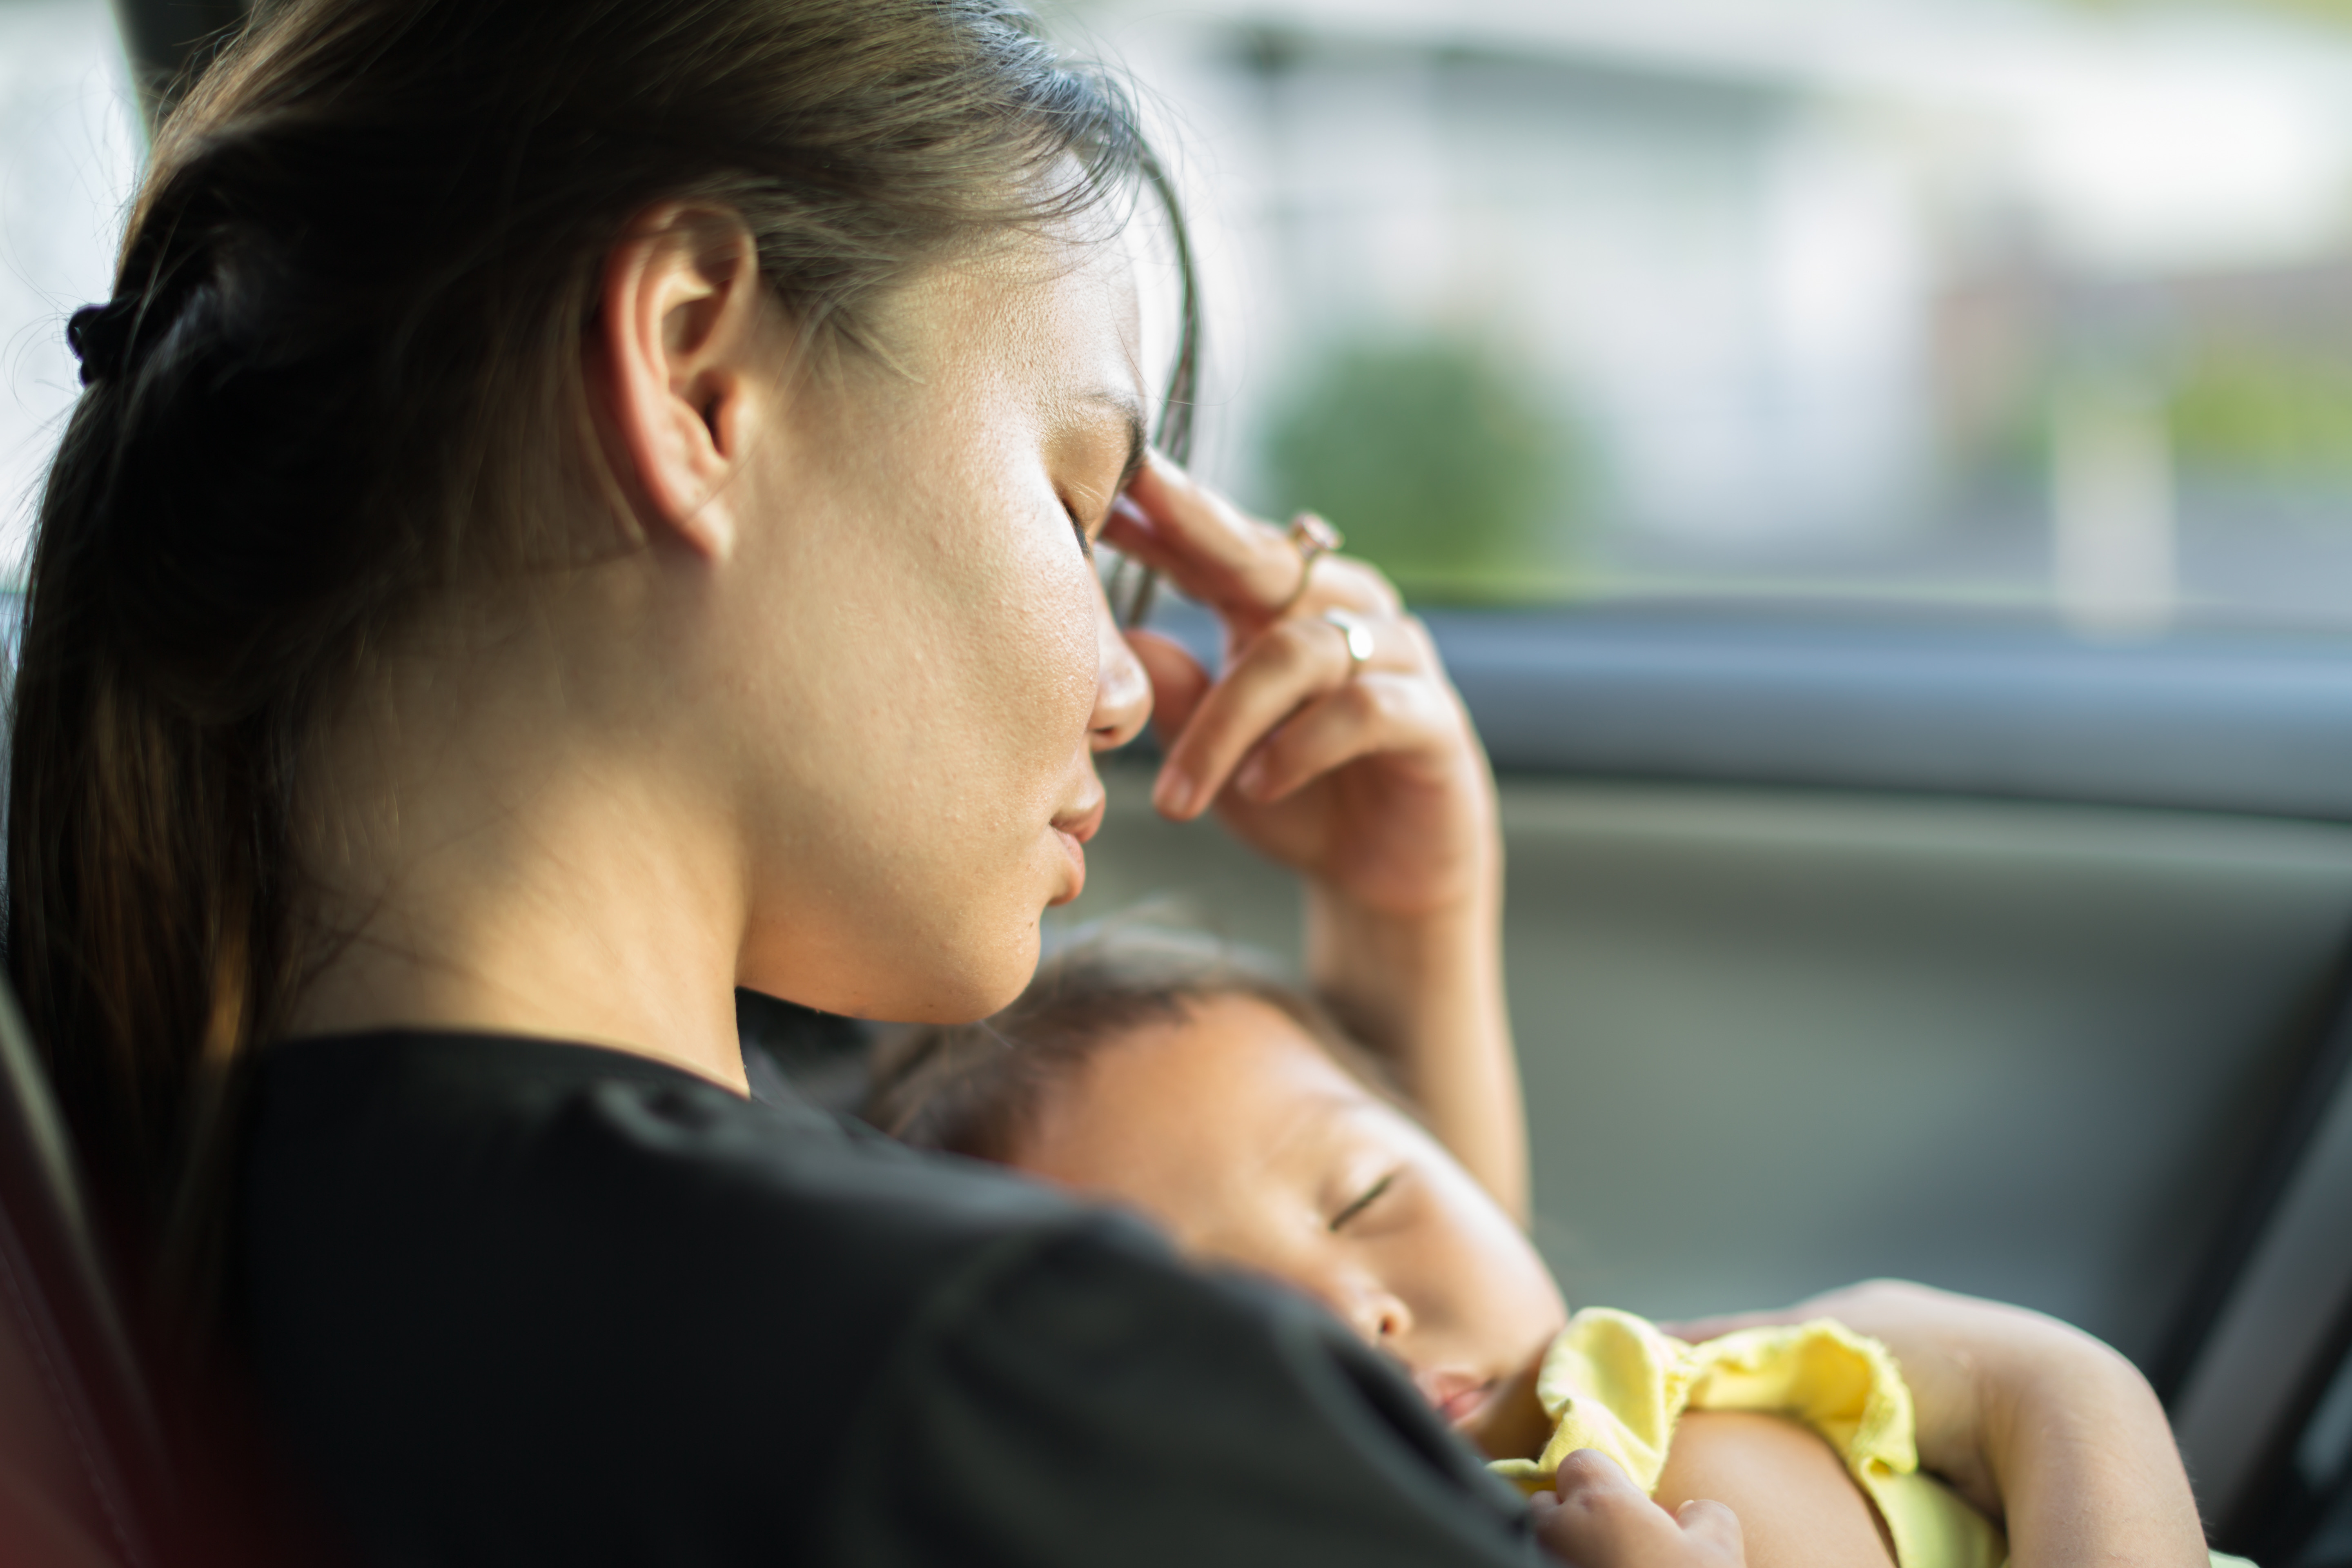 Woman sitting in car holding sleeping baby. She looks tired and anxious.